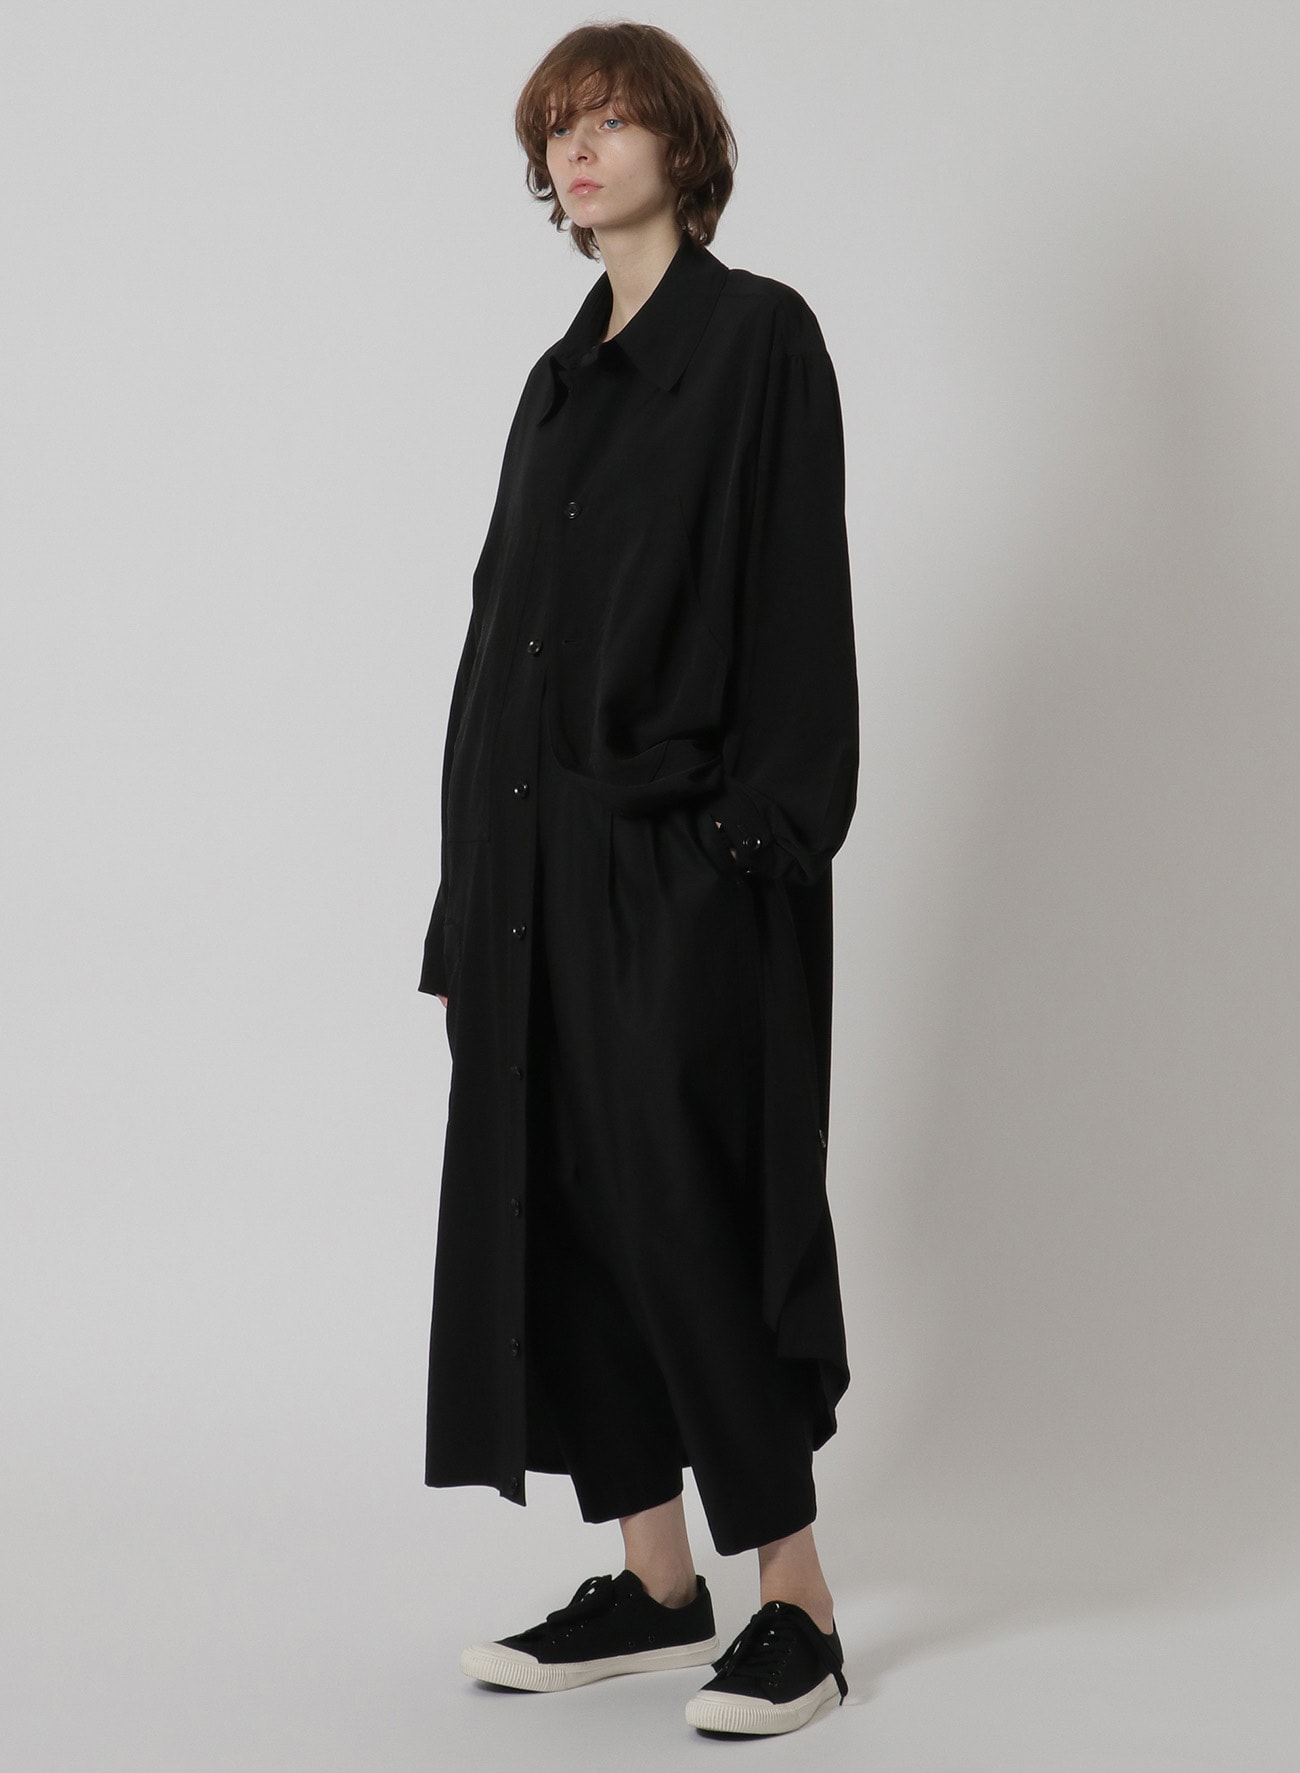 [Y's-Black Name]TRIACETATE POLYESTER CREPE de CHINE SIDE VENT WORK SHIRT COAT